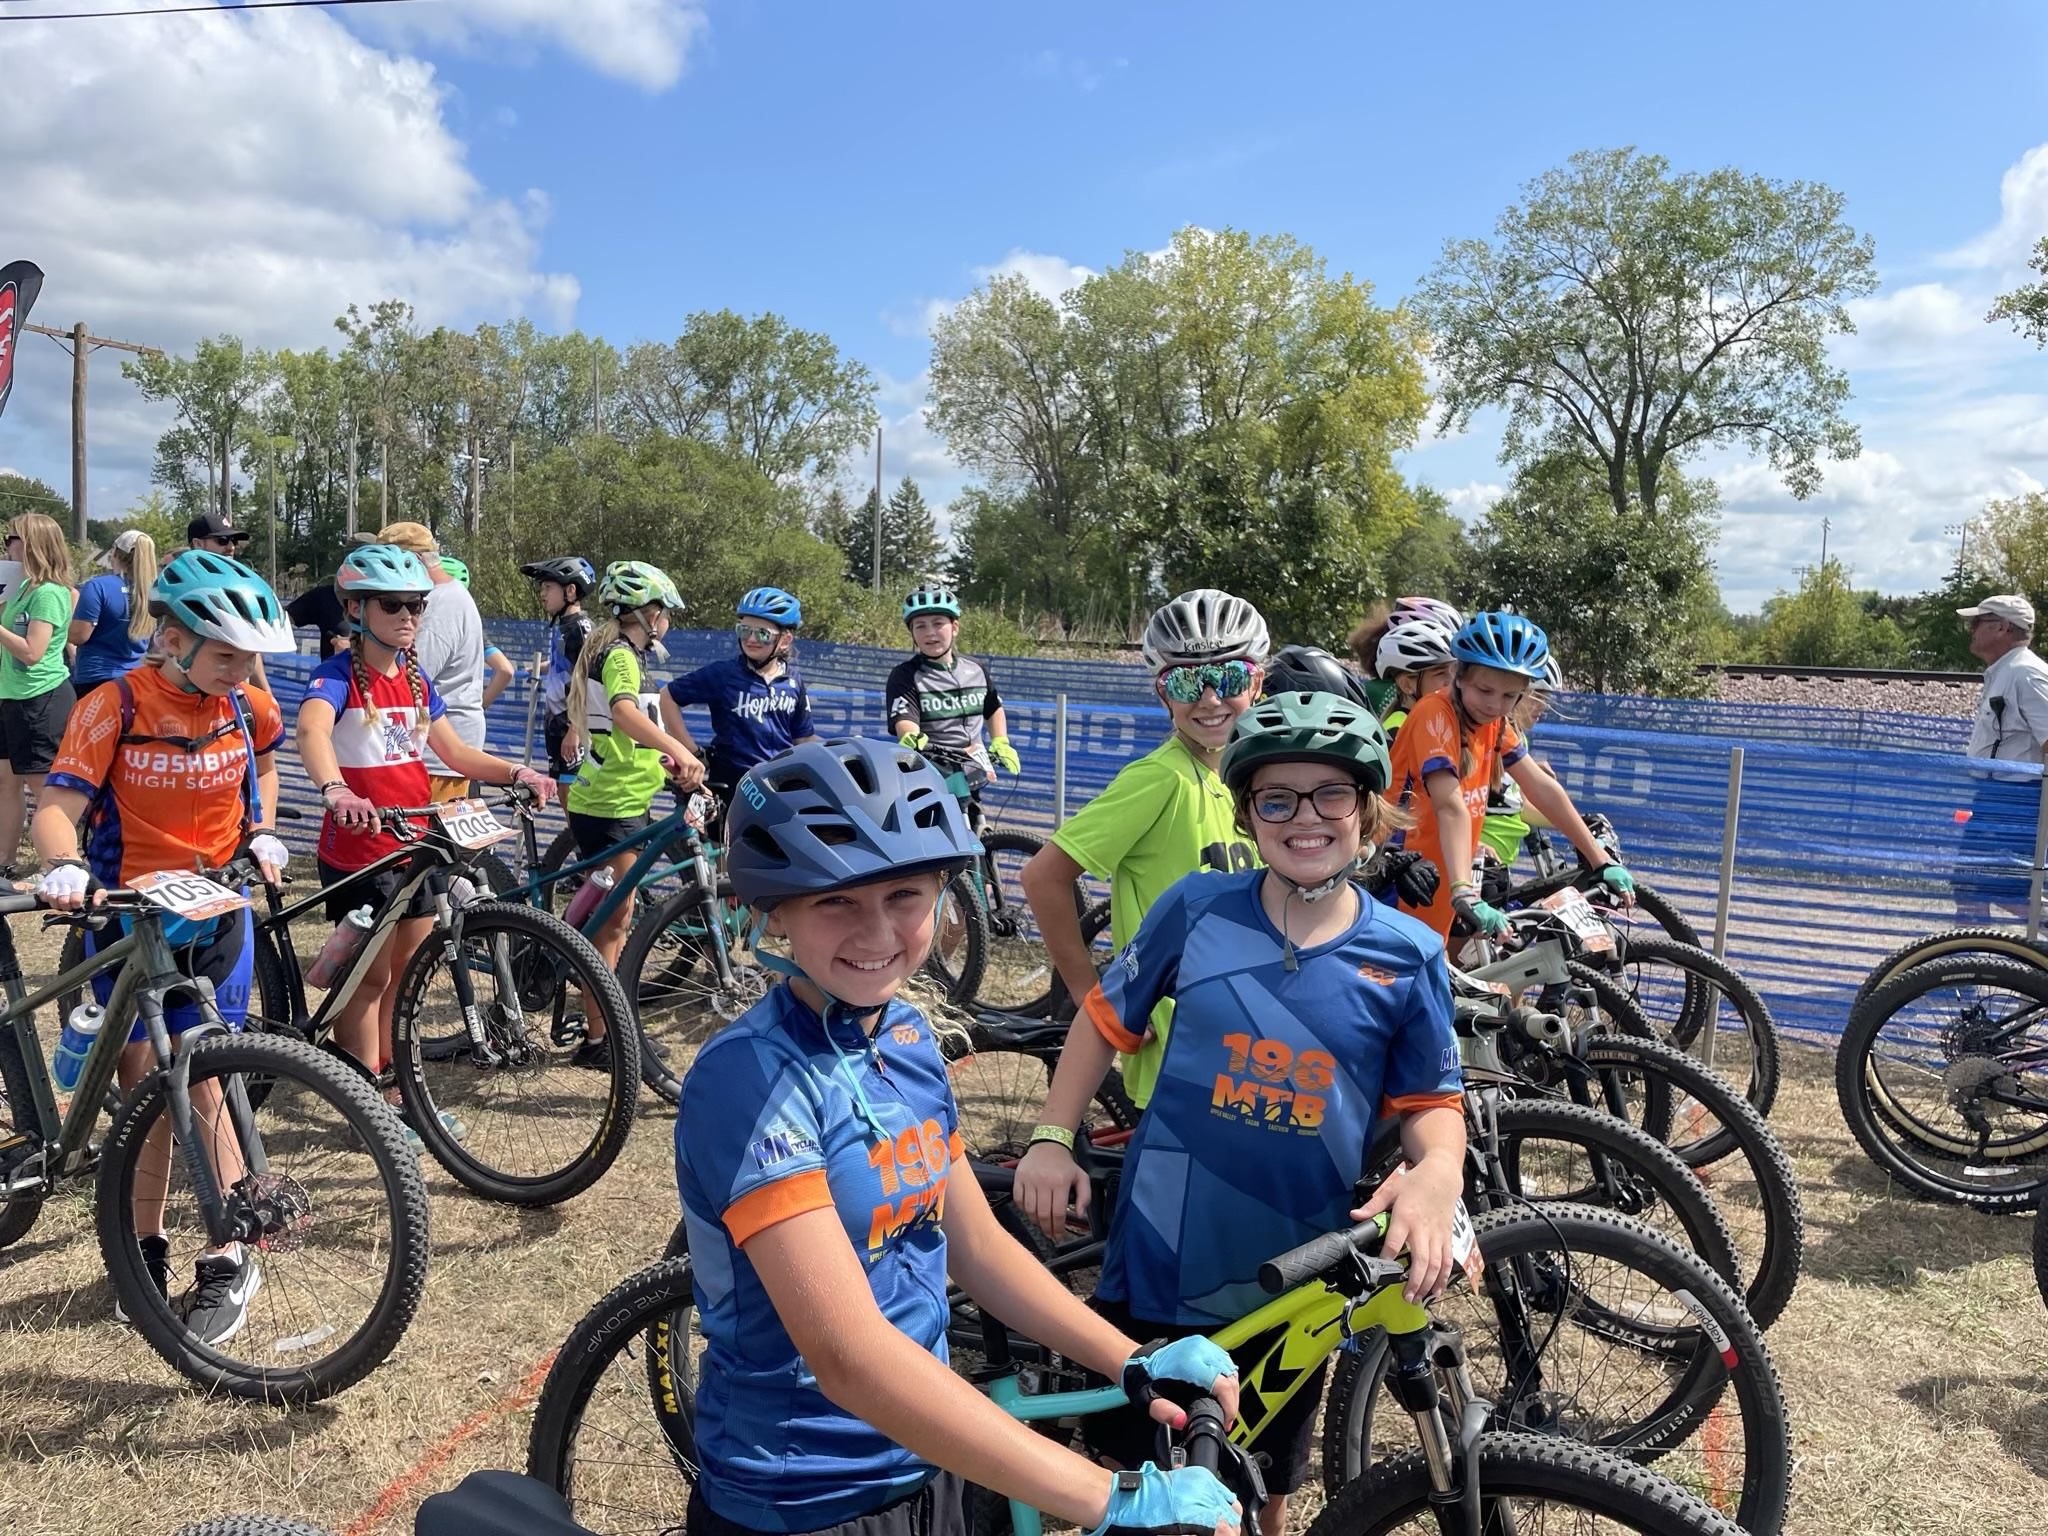 Local girls lined up at start of mountain bike race